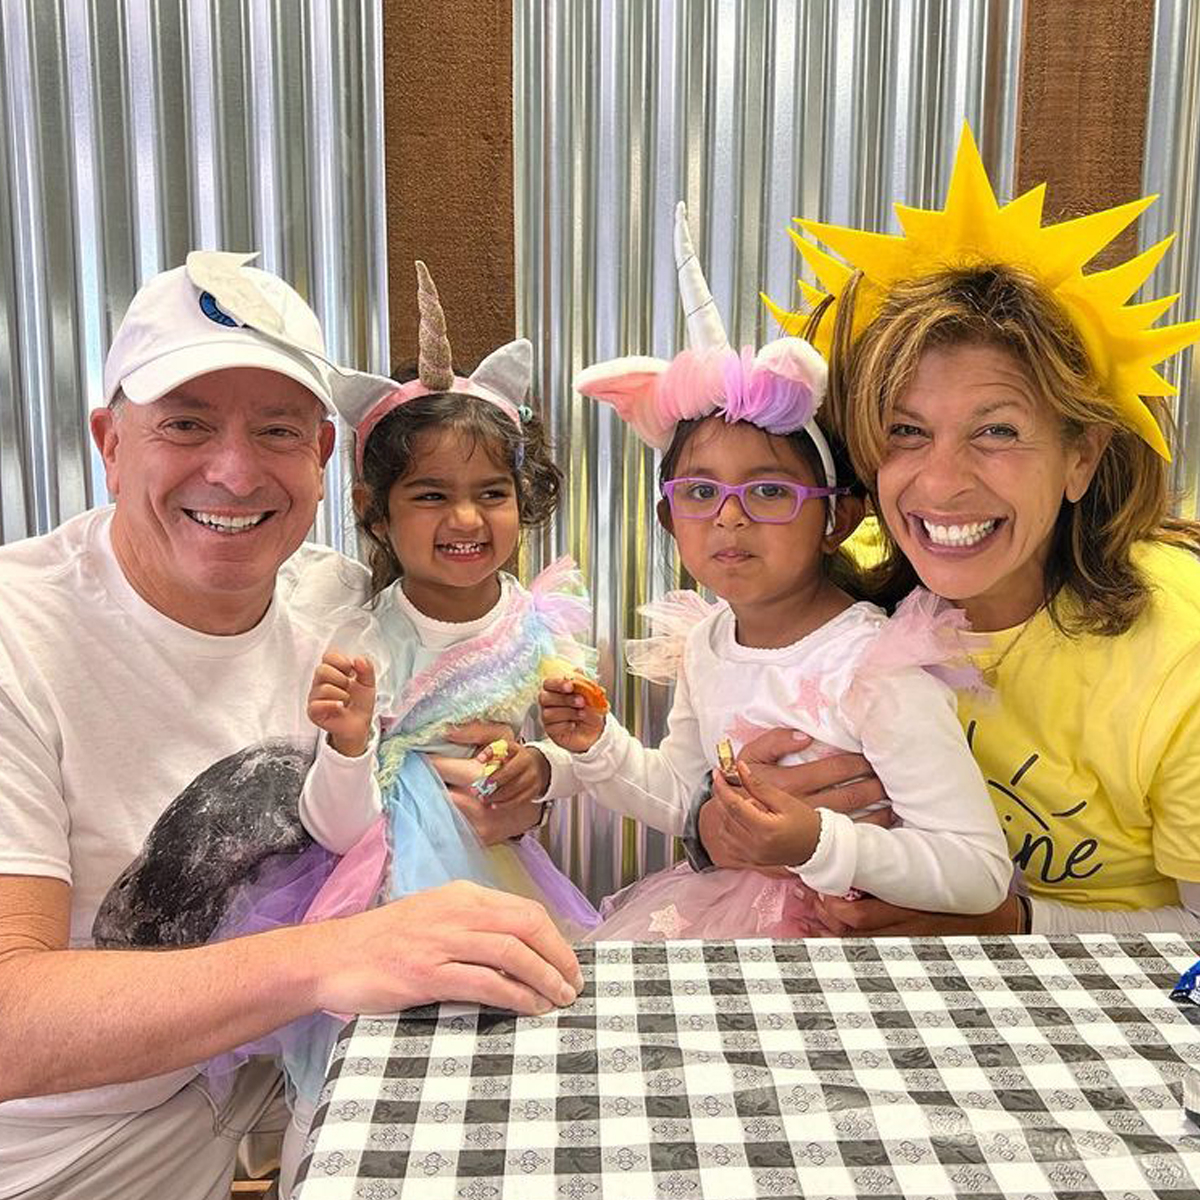 Hoda Kotb Returns to Today After 3-Year-Old Daughter Hope Is Discharged From Hospital – E! Online